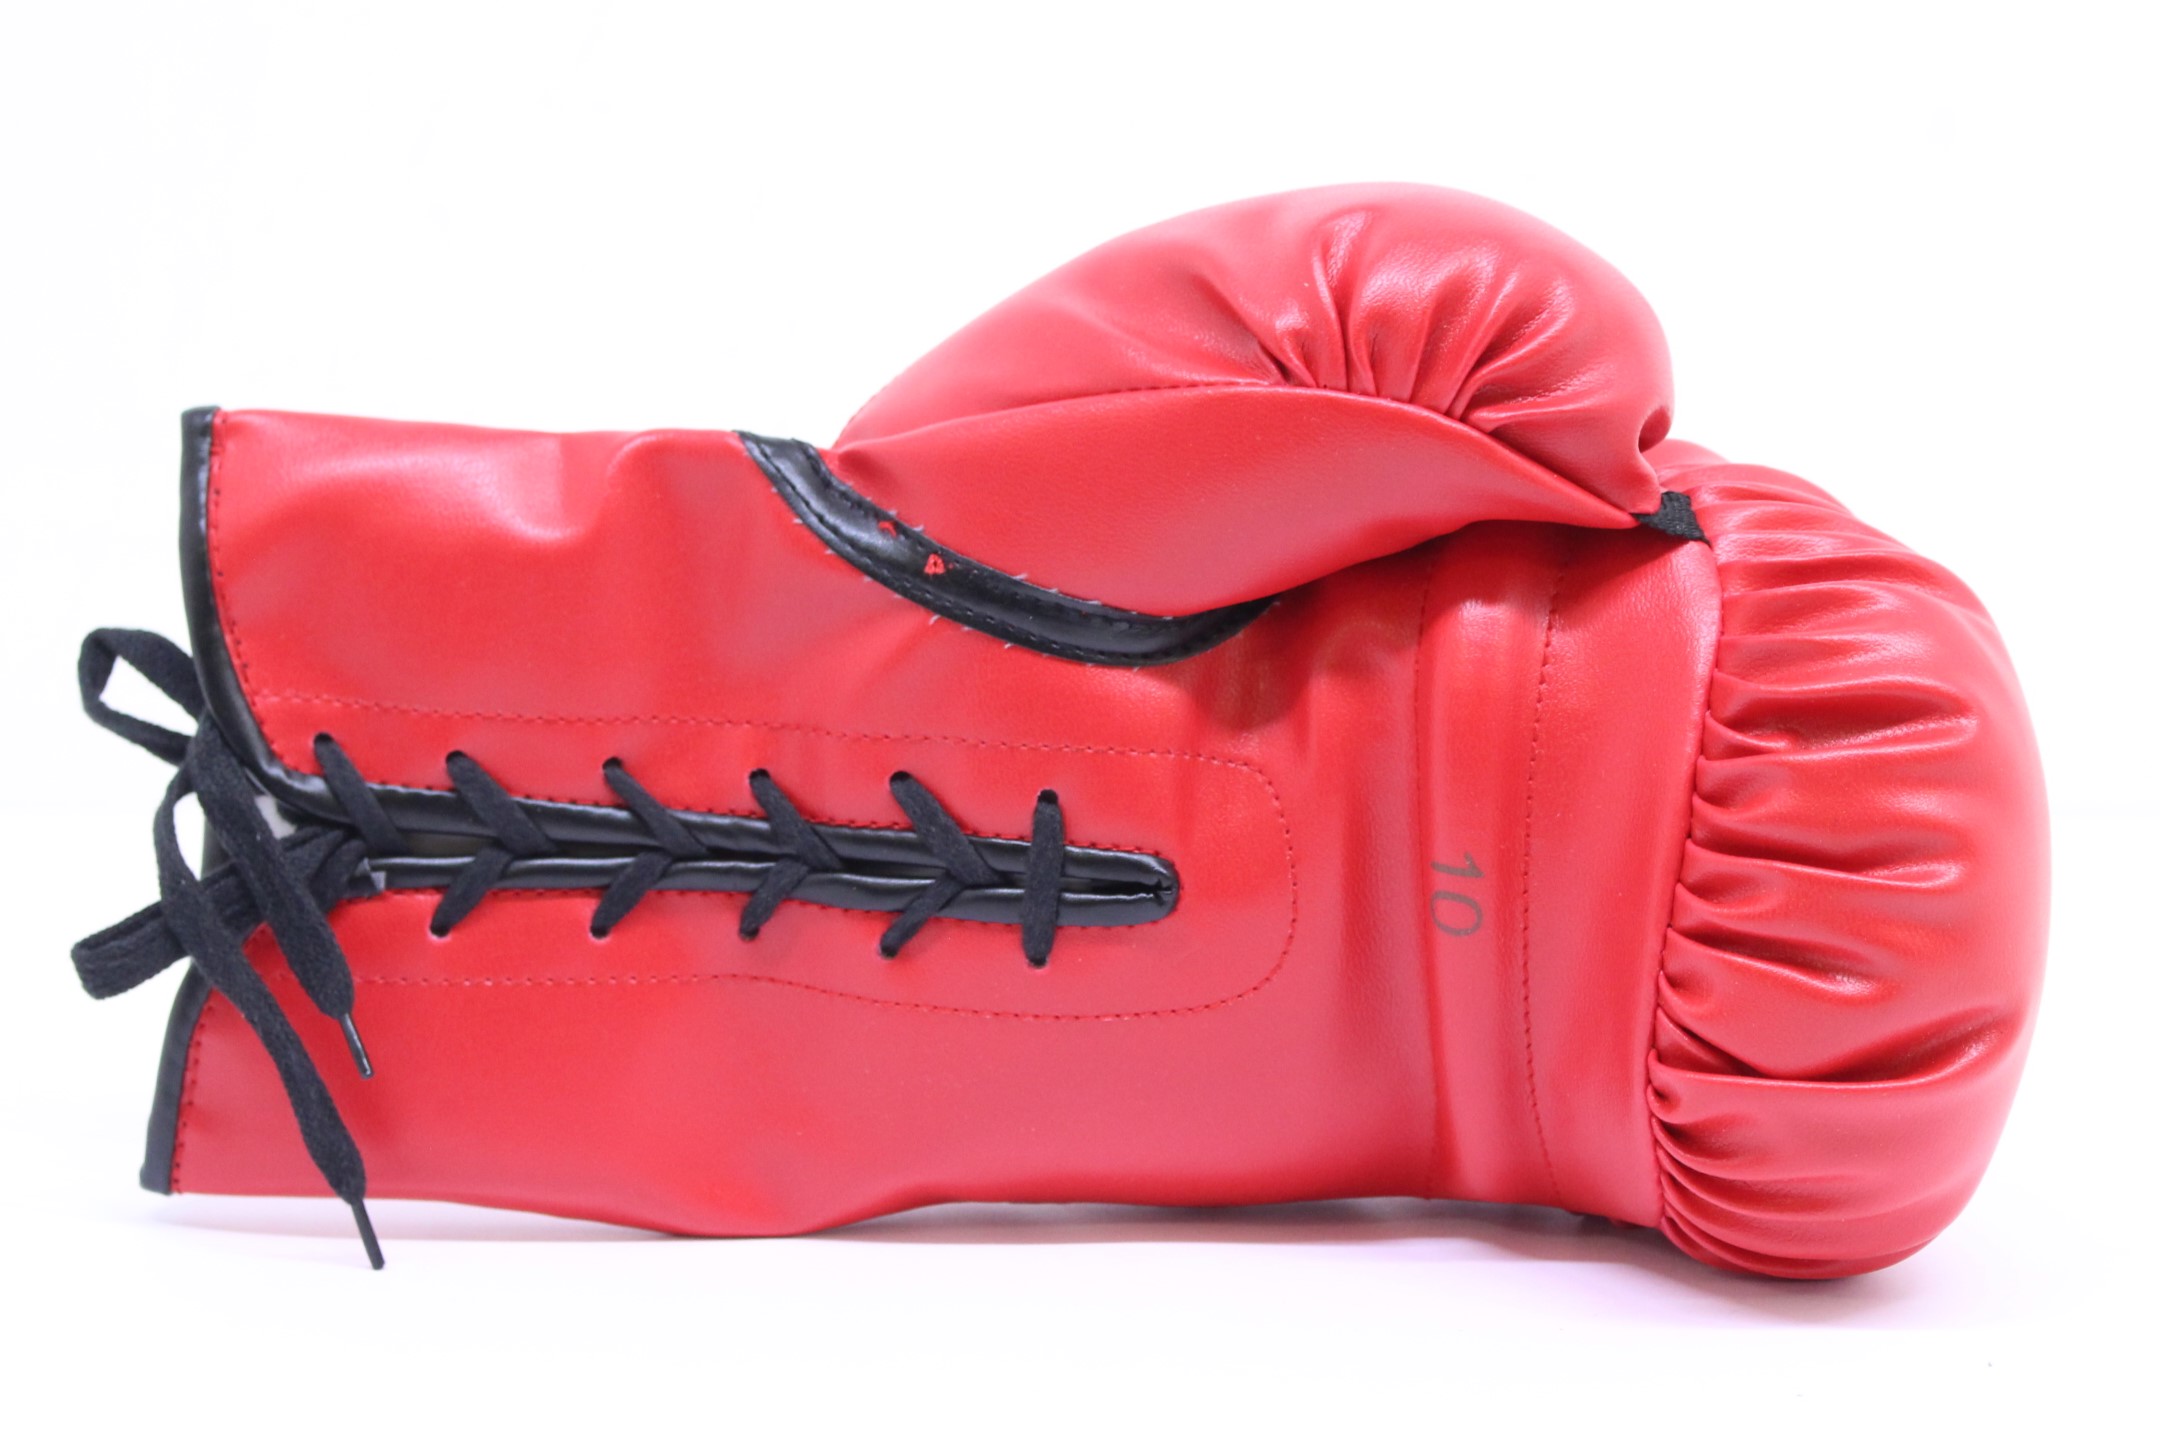 Boxing: A signed Everlast, Lennox Lewis Boxing Glove, authenticated by Allstars 13474. Signature - Image 2 of 3